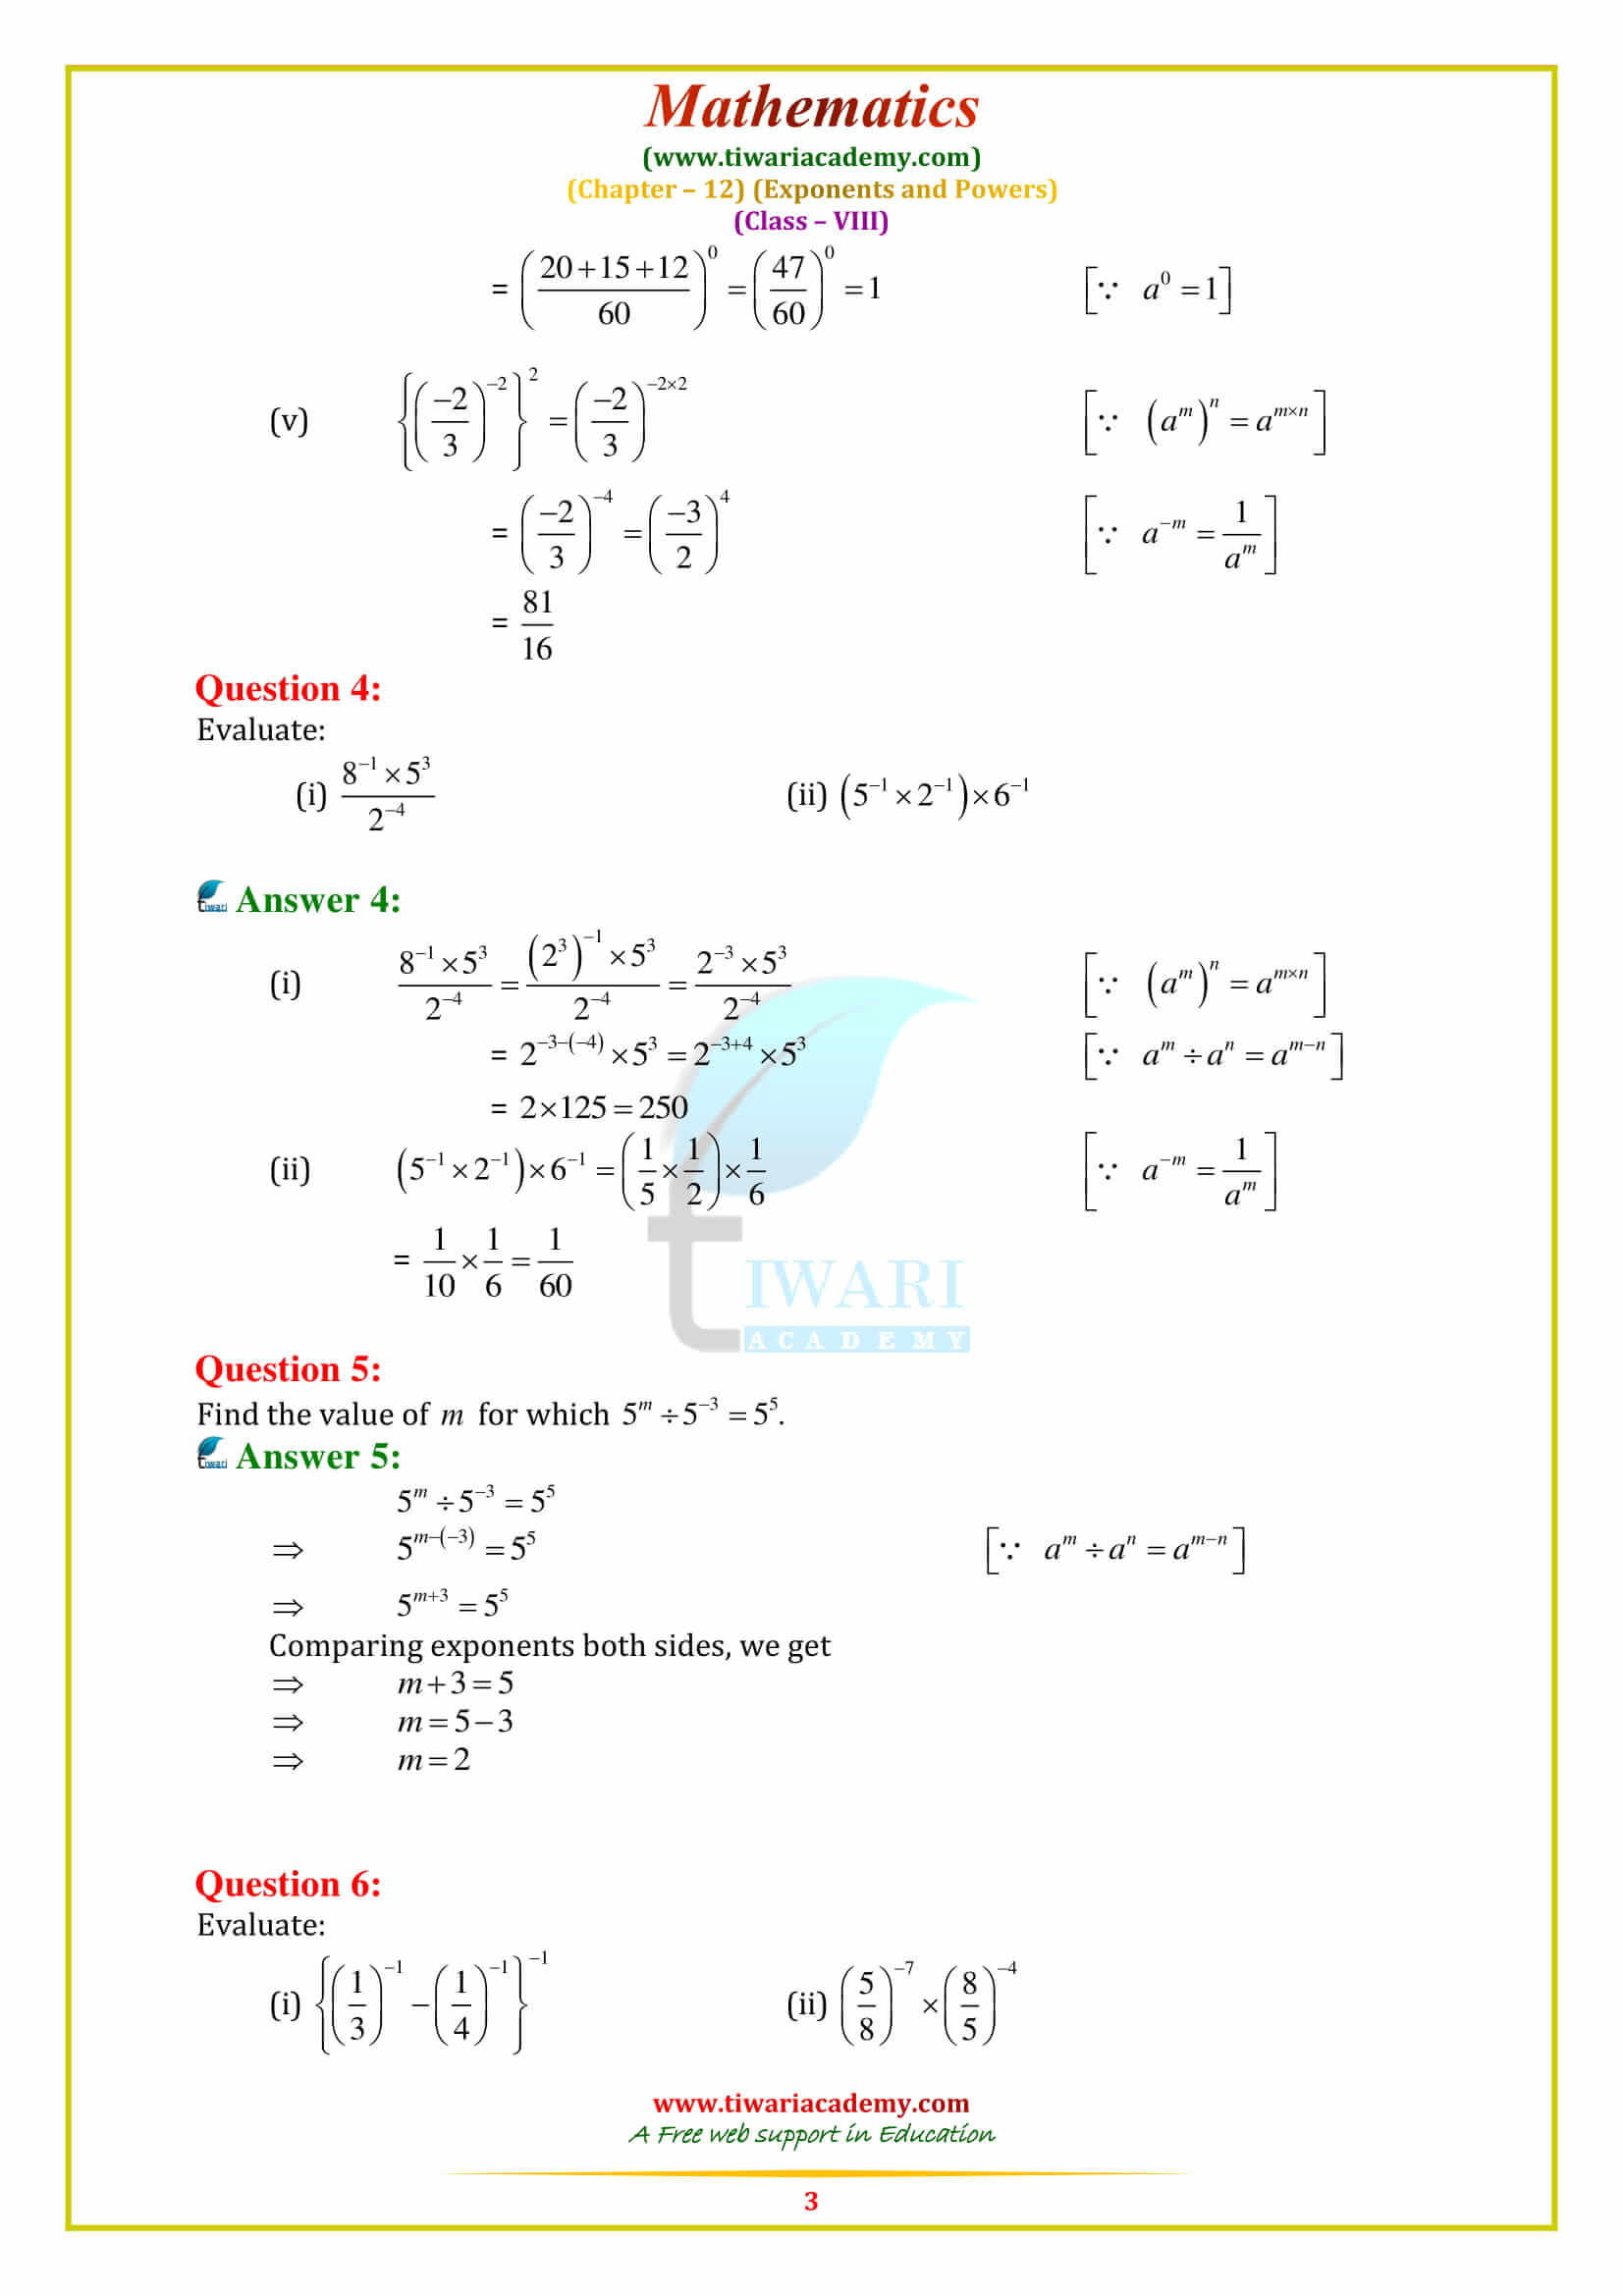 NCERT Solutions for Class 8 Maths Chapter 12 Exponents and Powers for mp board